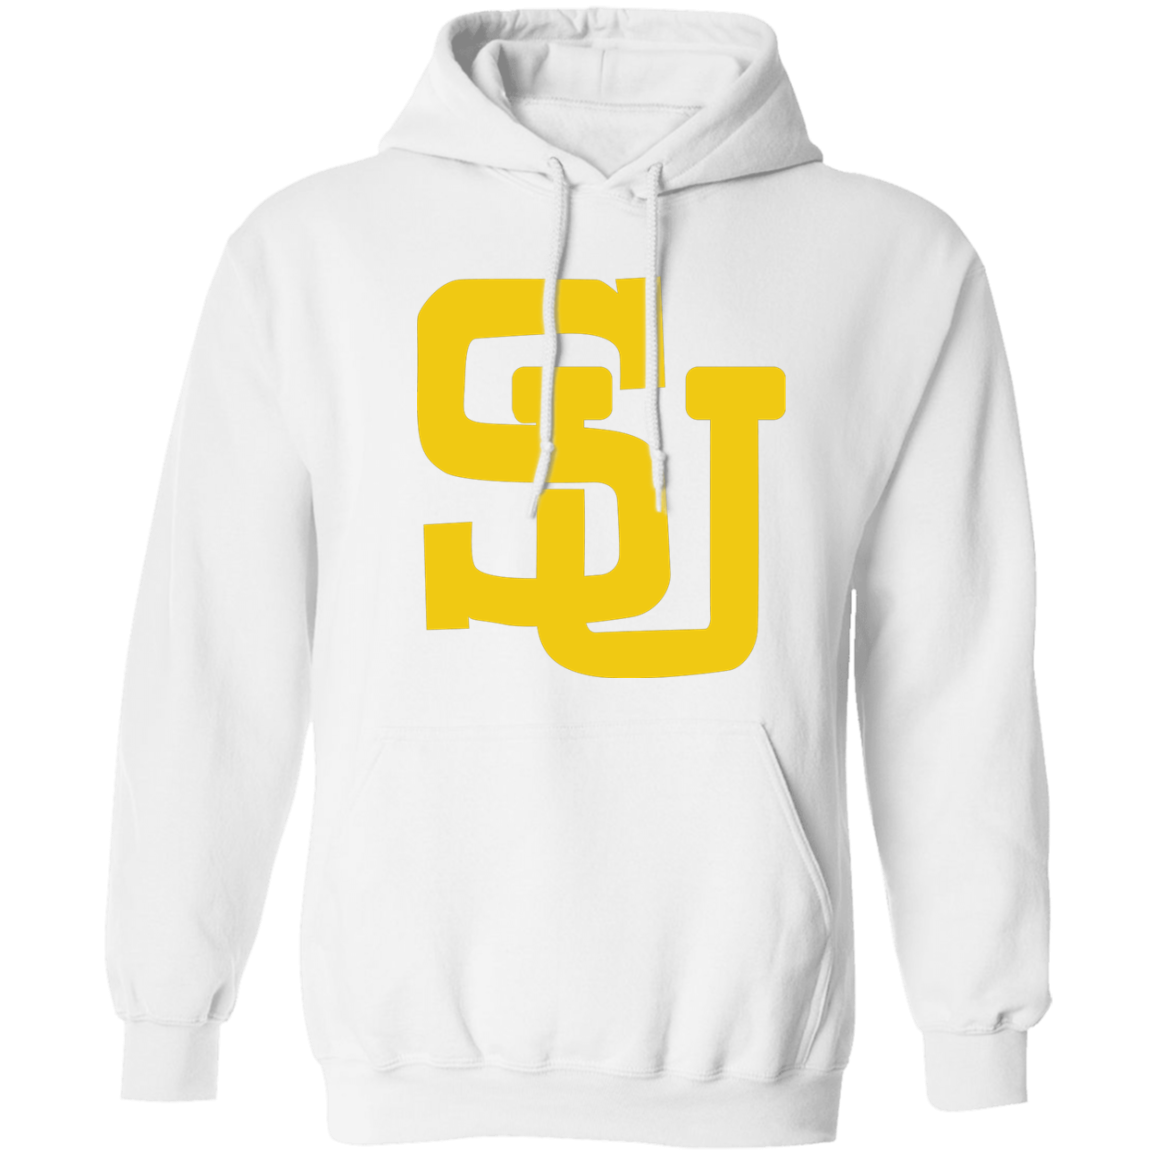 SU Jaguars 1987 Edition Z66x Pullover Hoodie 8 oz (Closeout)